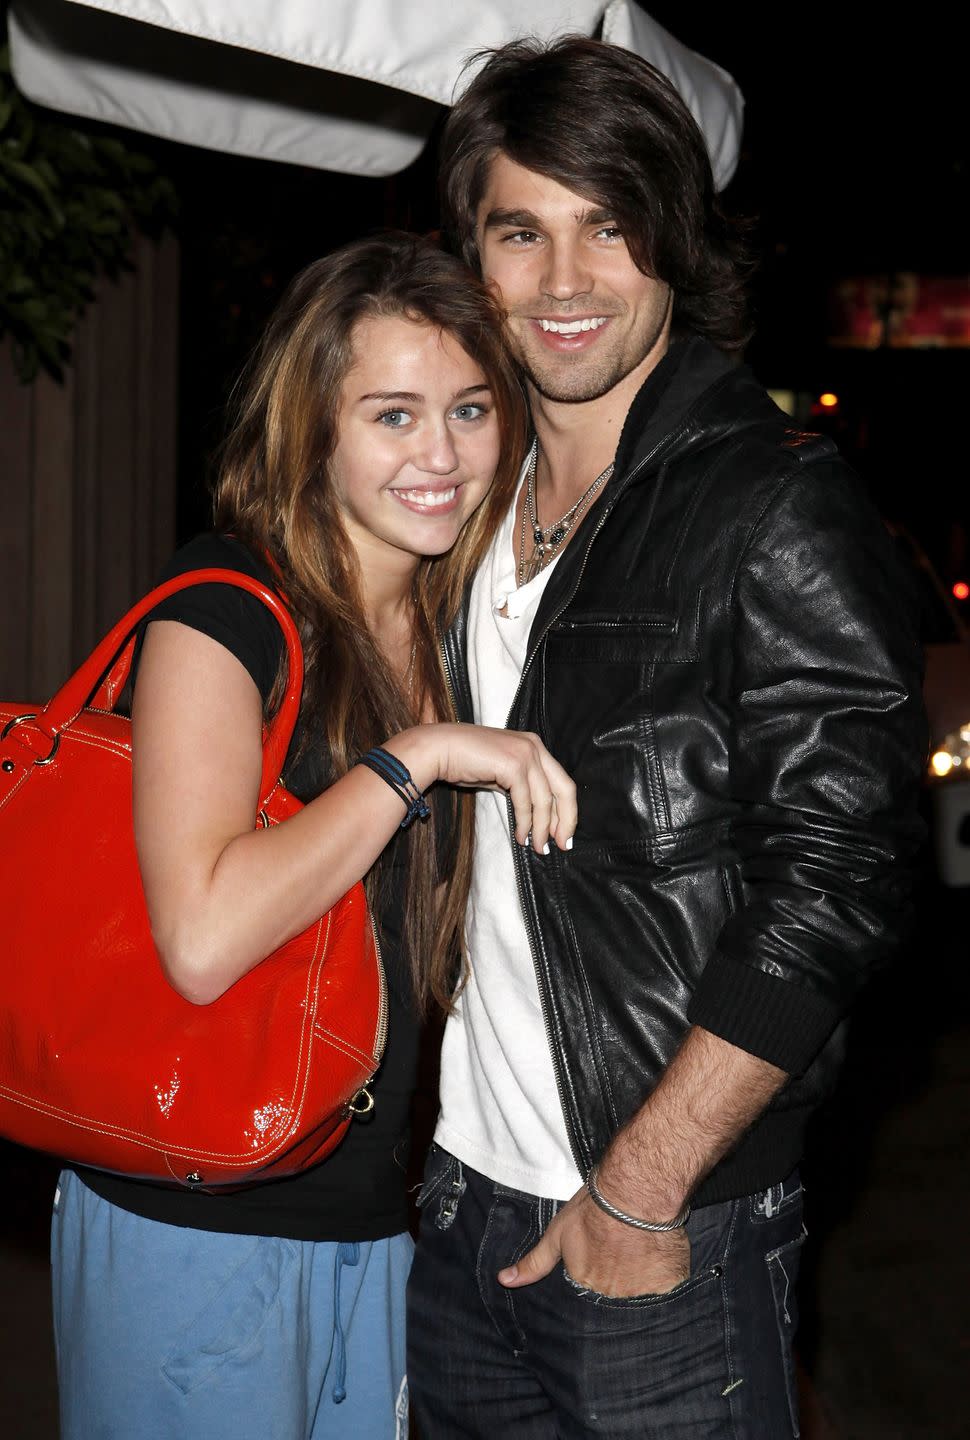 los angeles, ca march 9 singer miley cyrus l and model justin gaston visit nubu march 9, 2009 in west hollywood, california photo by jean baptiste lacroixwireimage